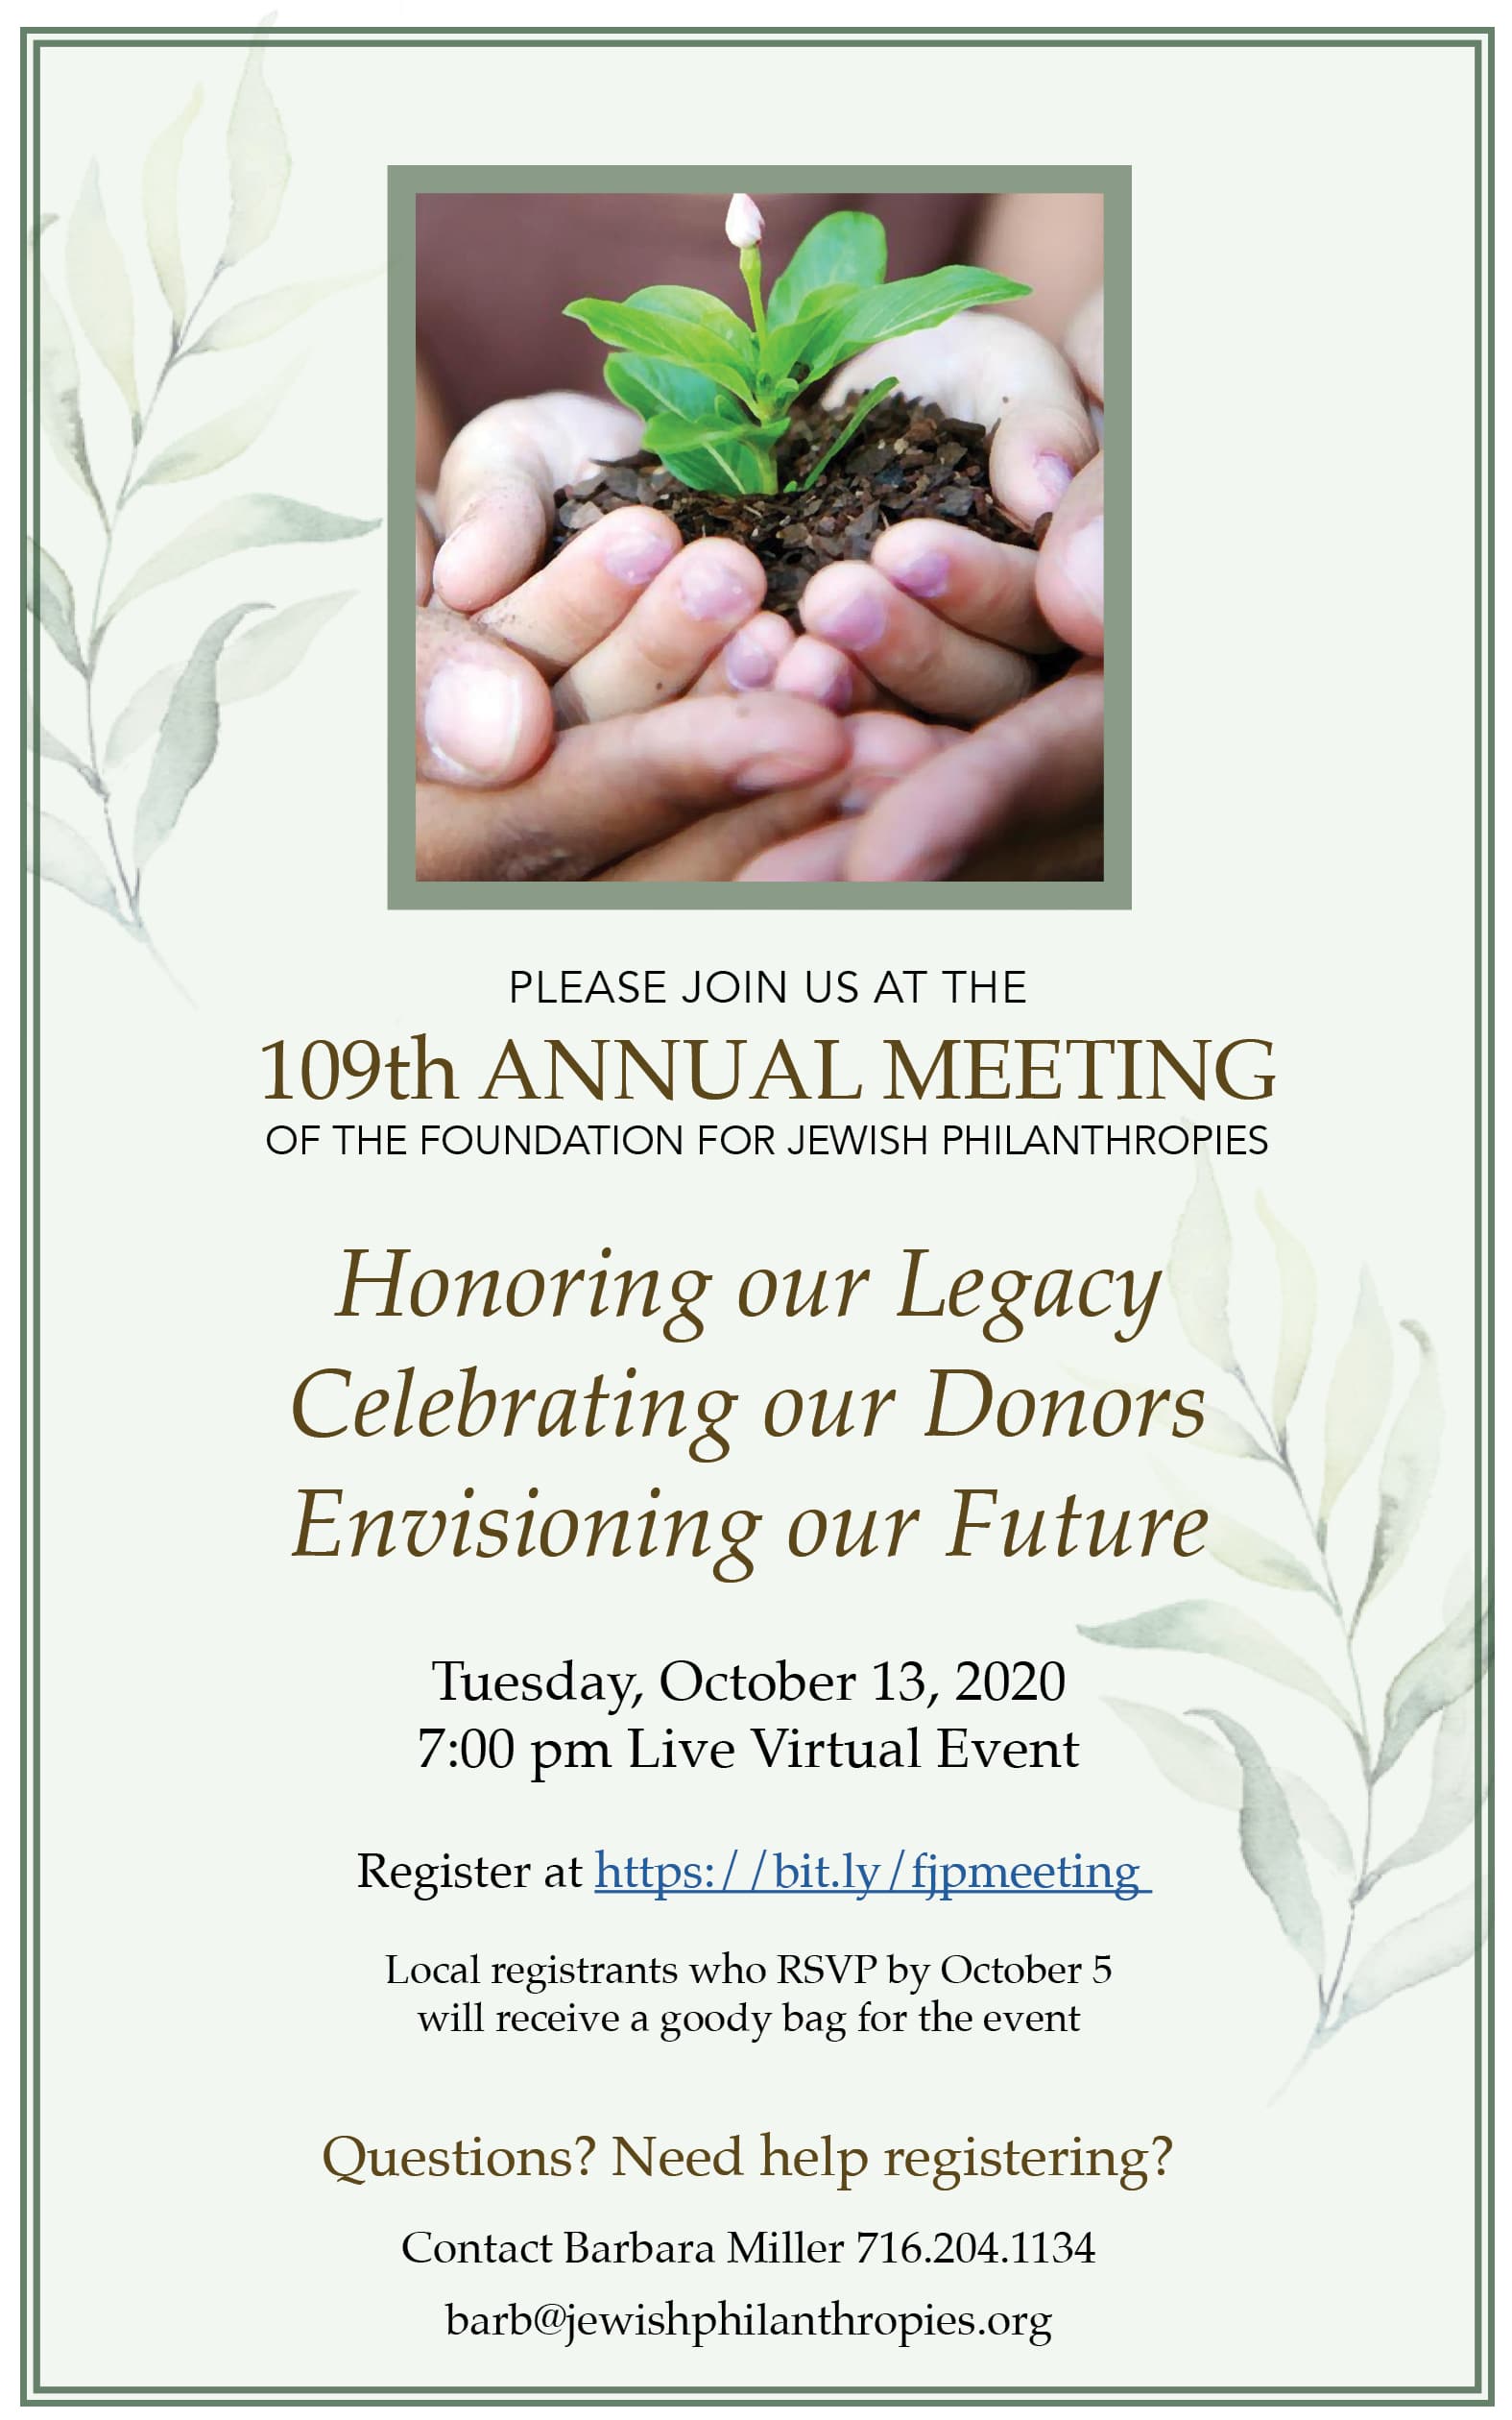 Remembering the past and looking to the future - FJP Annual Mtg 2020 Invitation